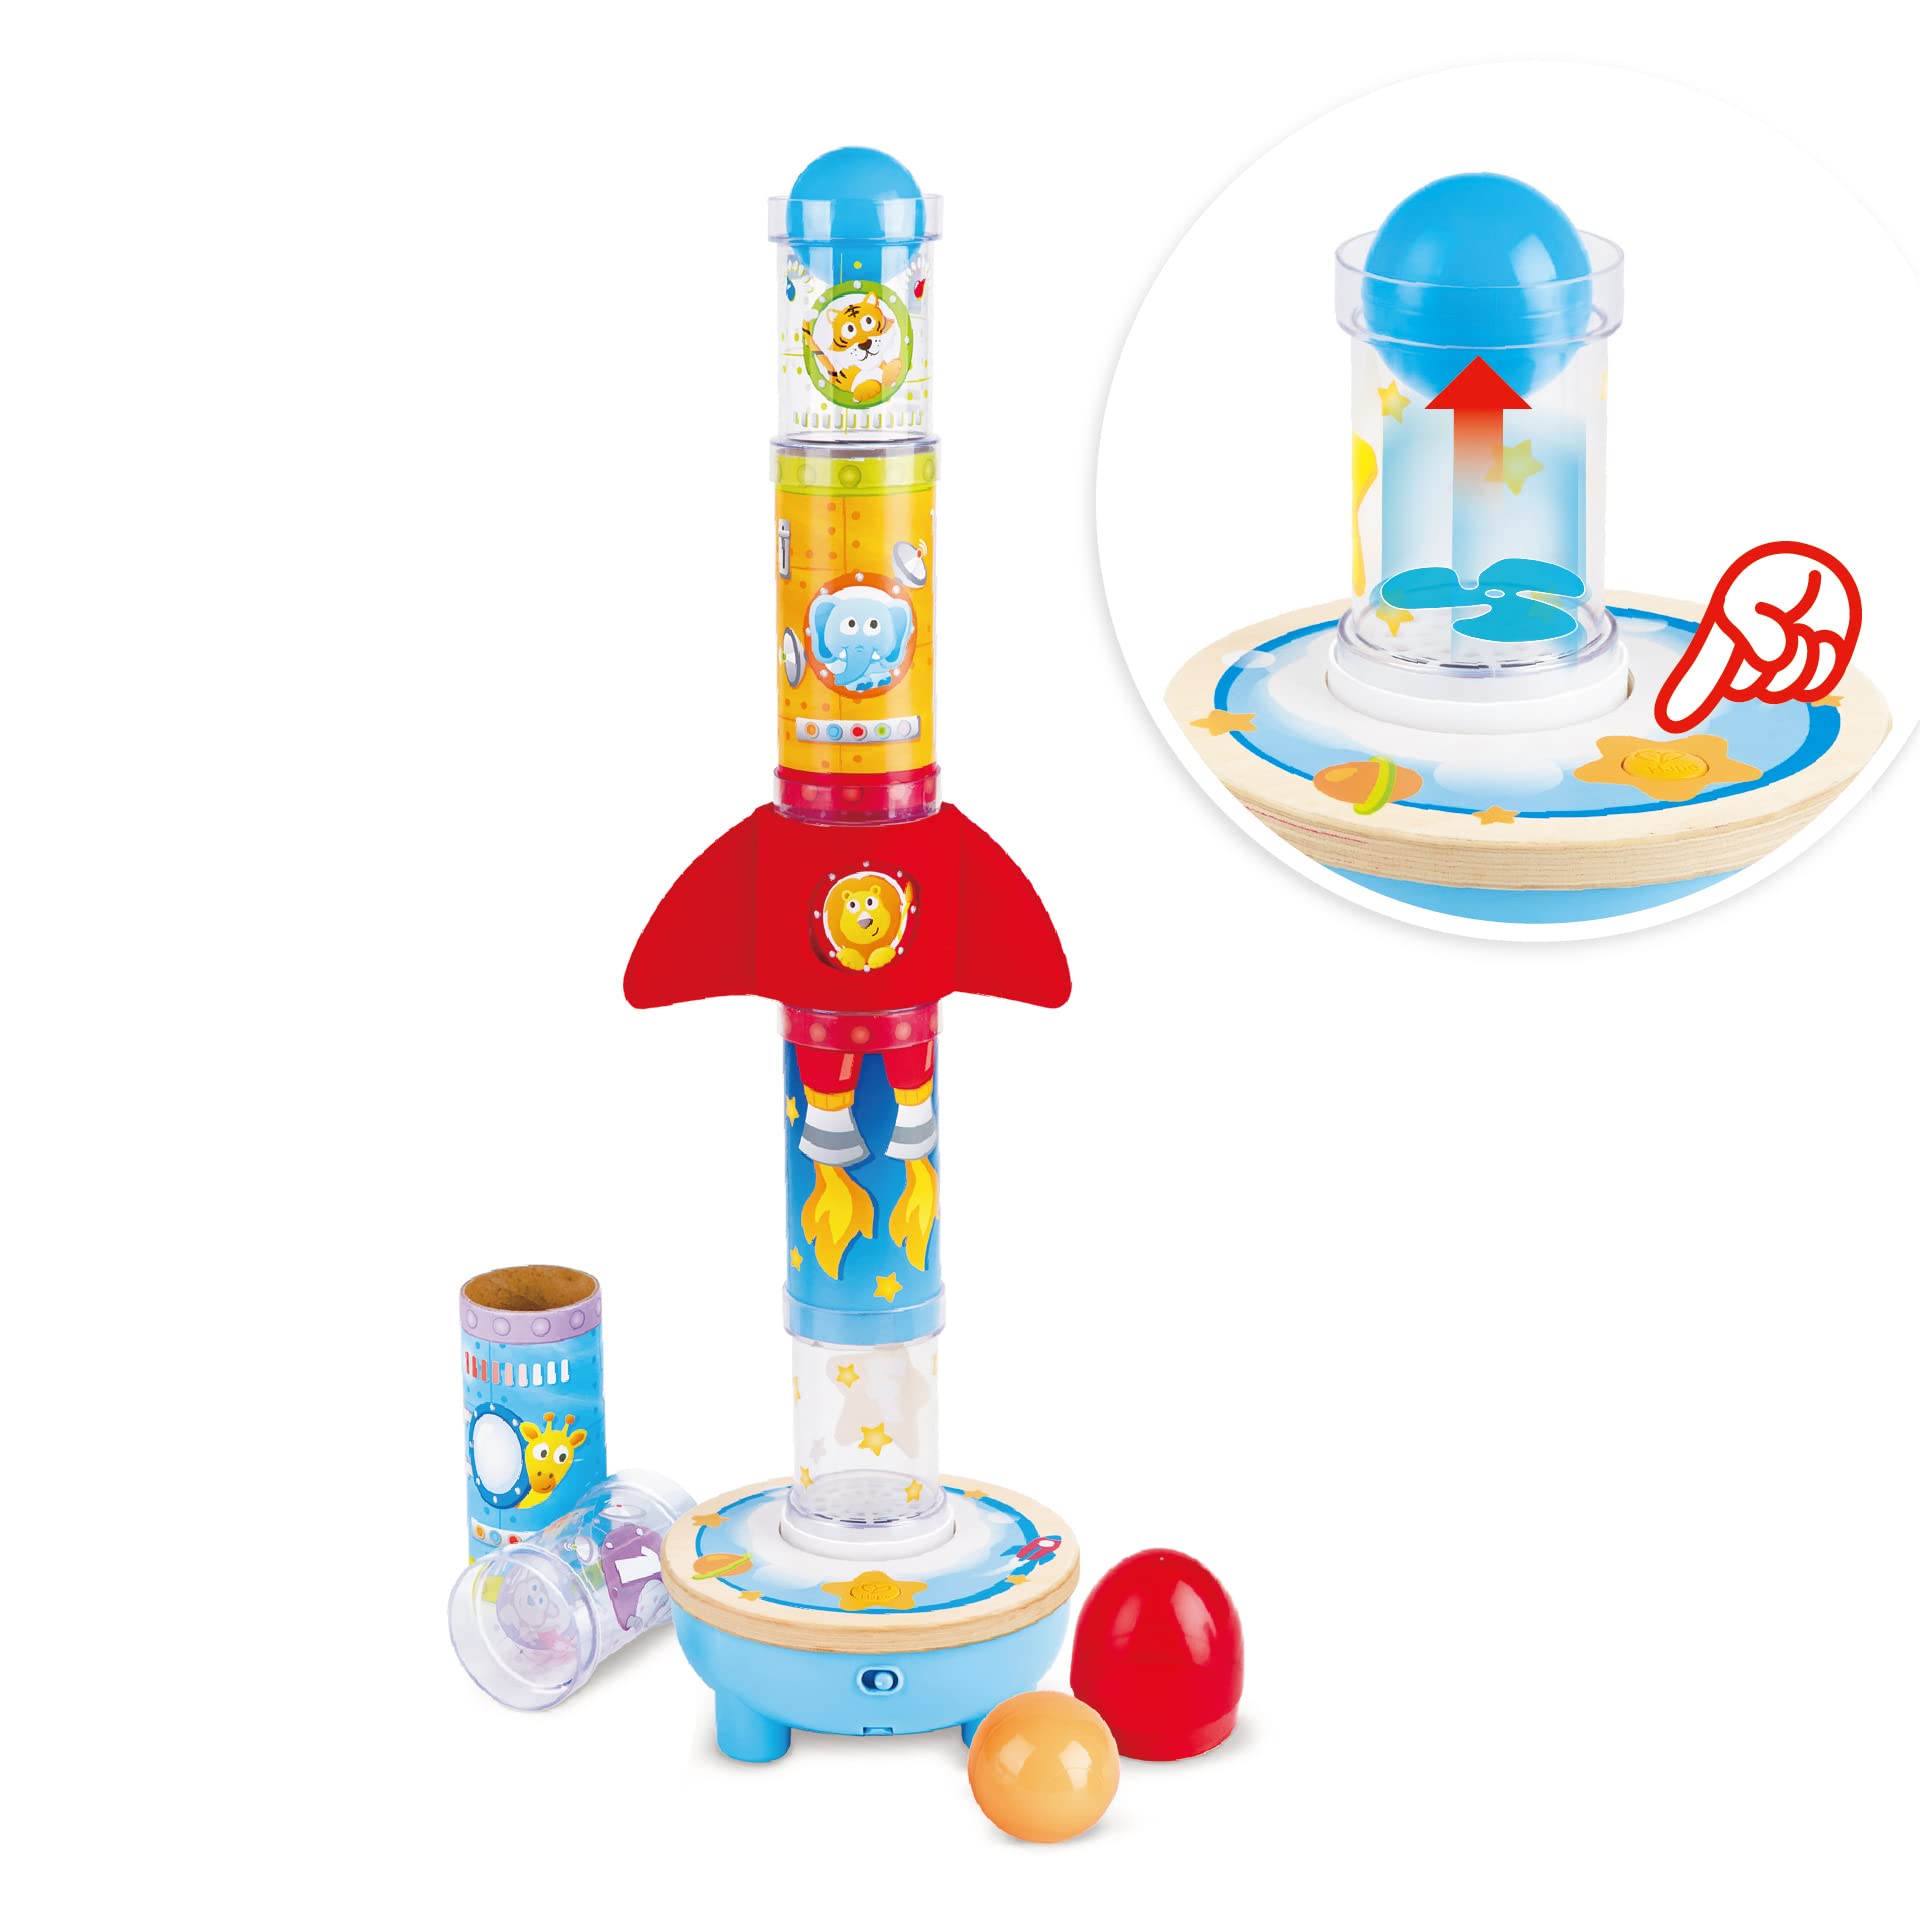 en vente Hape Rocket Stacker Toy Air-Powered Ball Launcher Playset for Toddlers with Fan , 24 Months and Up, Black N2INb6F7s mode